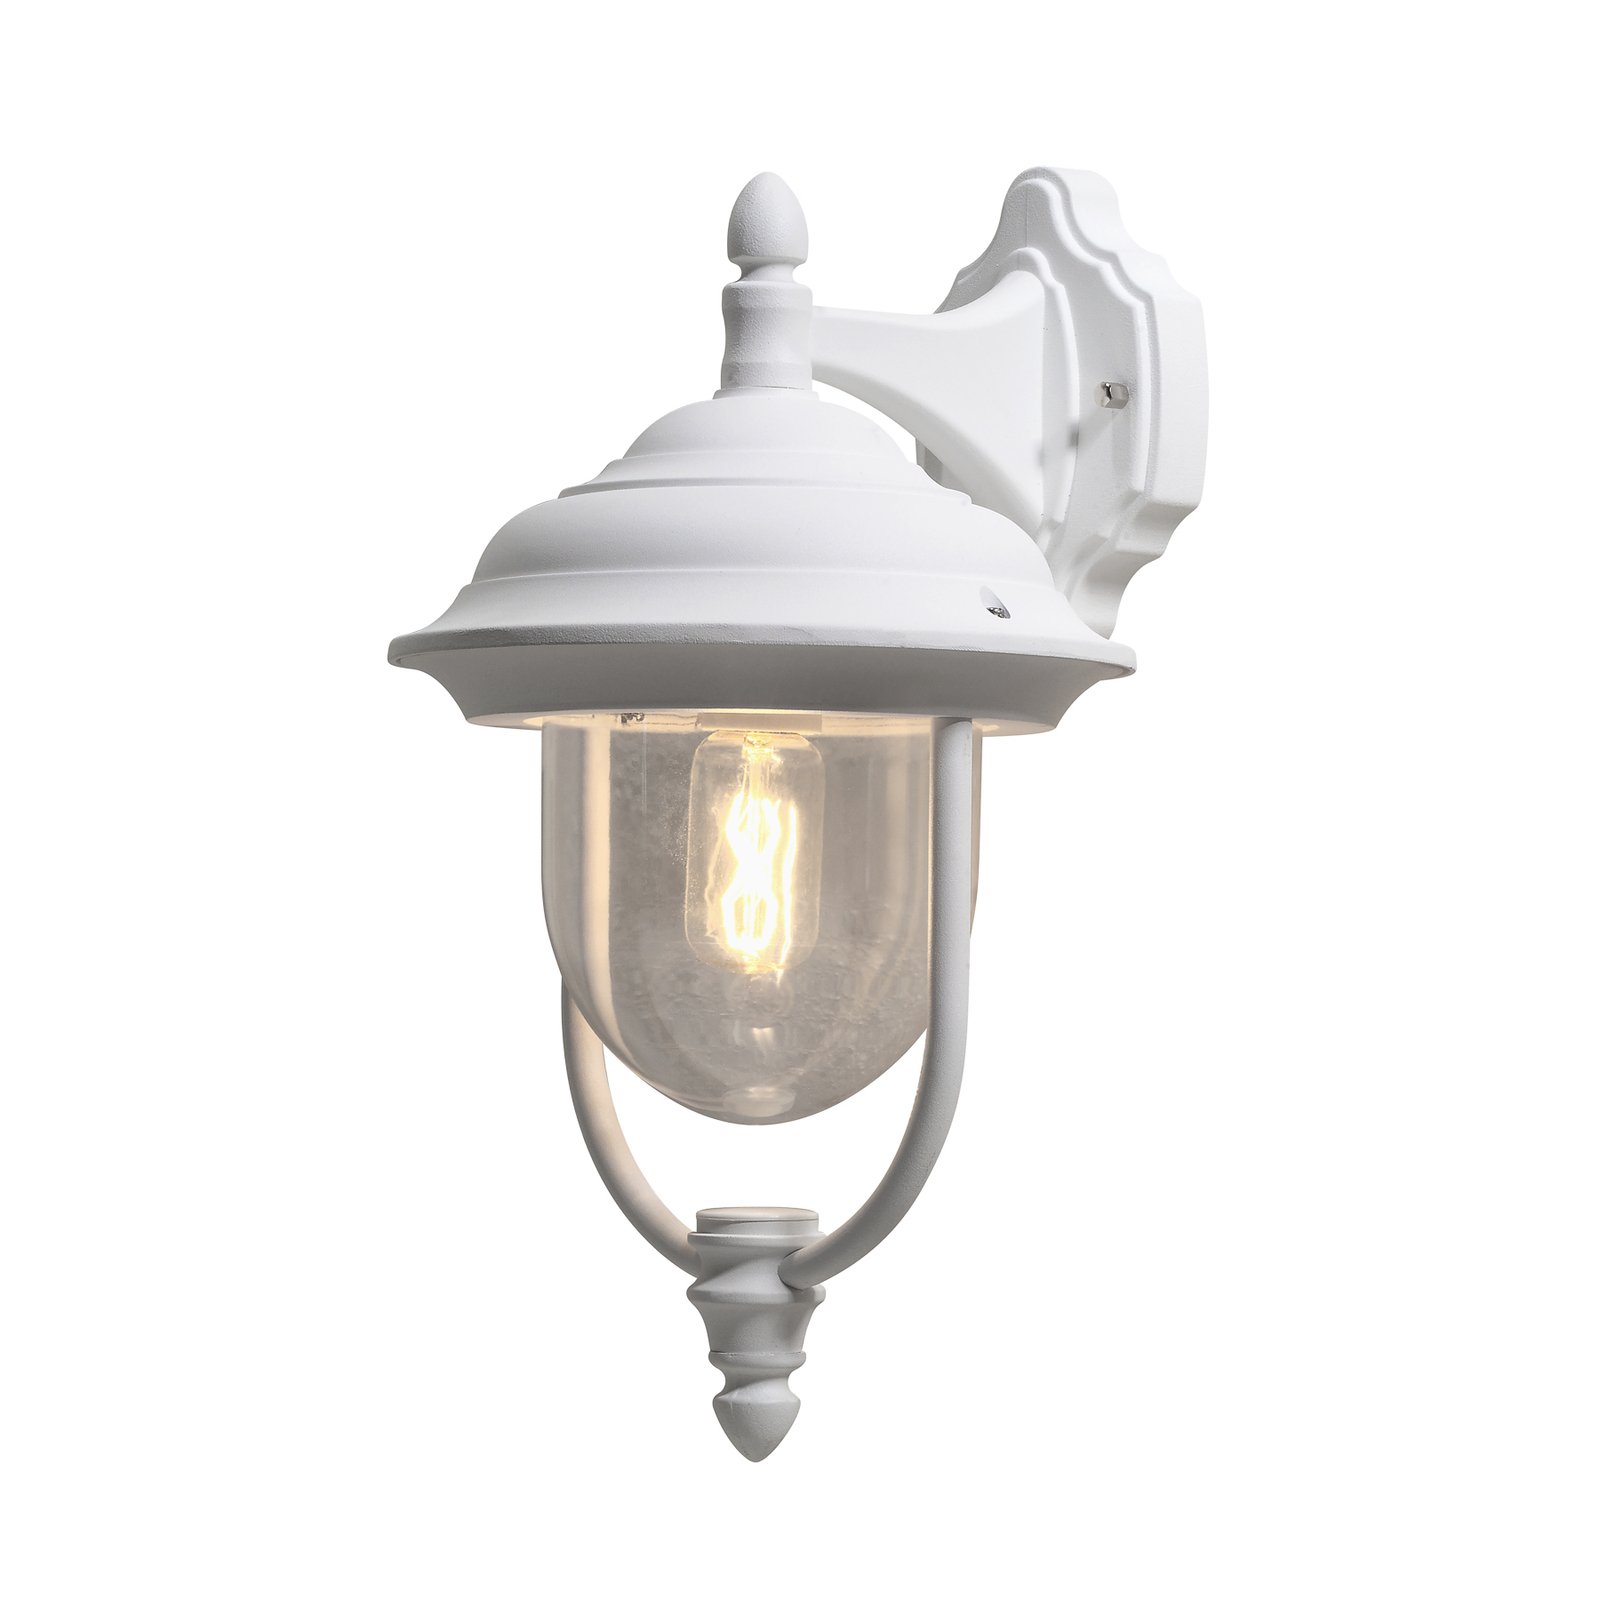 Parma outdoor wall light, hanging lantern in white